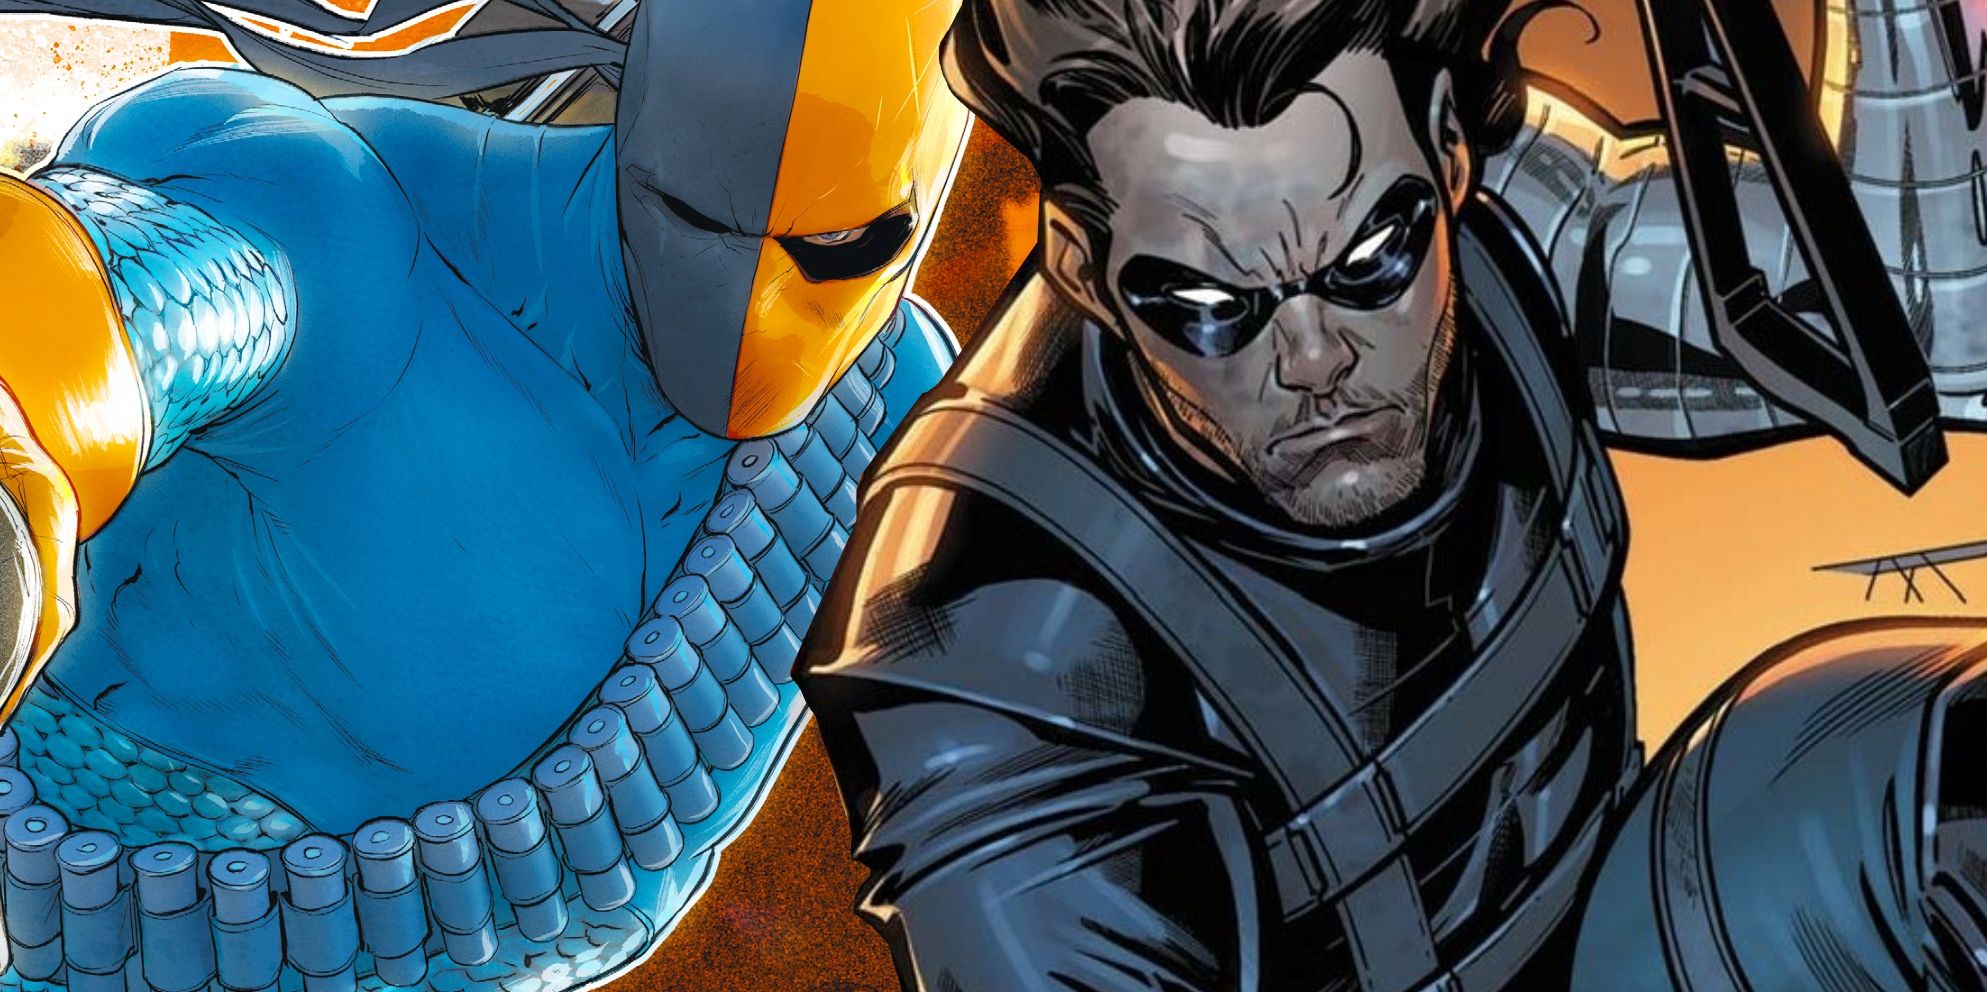 Deathstroke May Be DC's Winter Soldier In New Year One Origin Featured